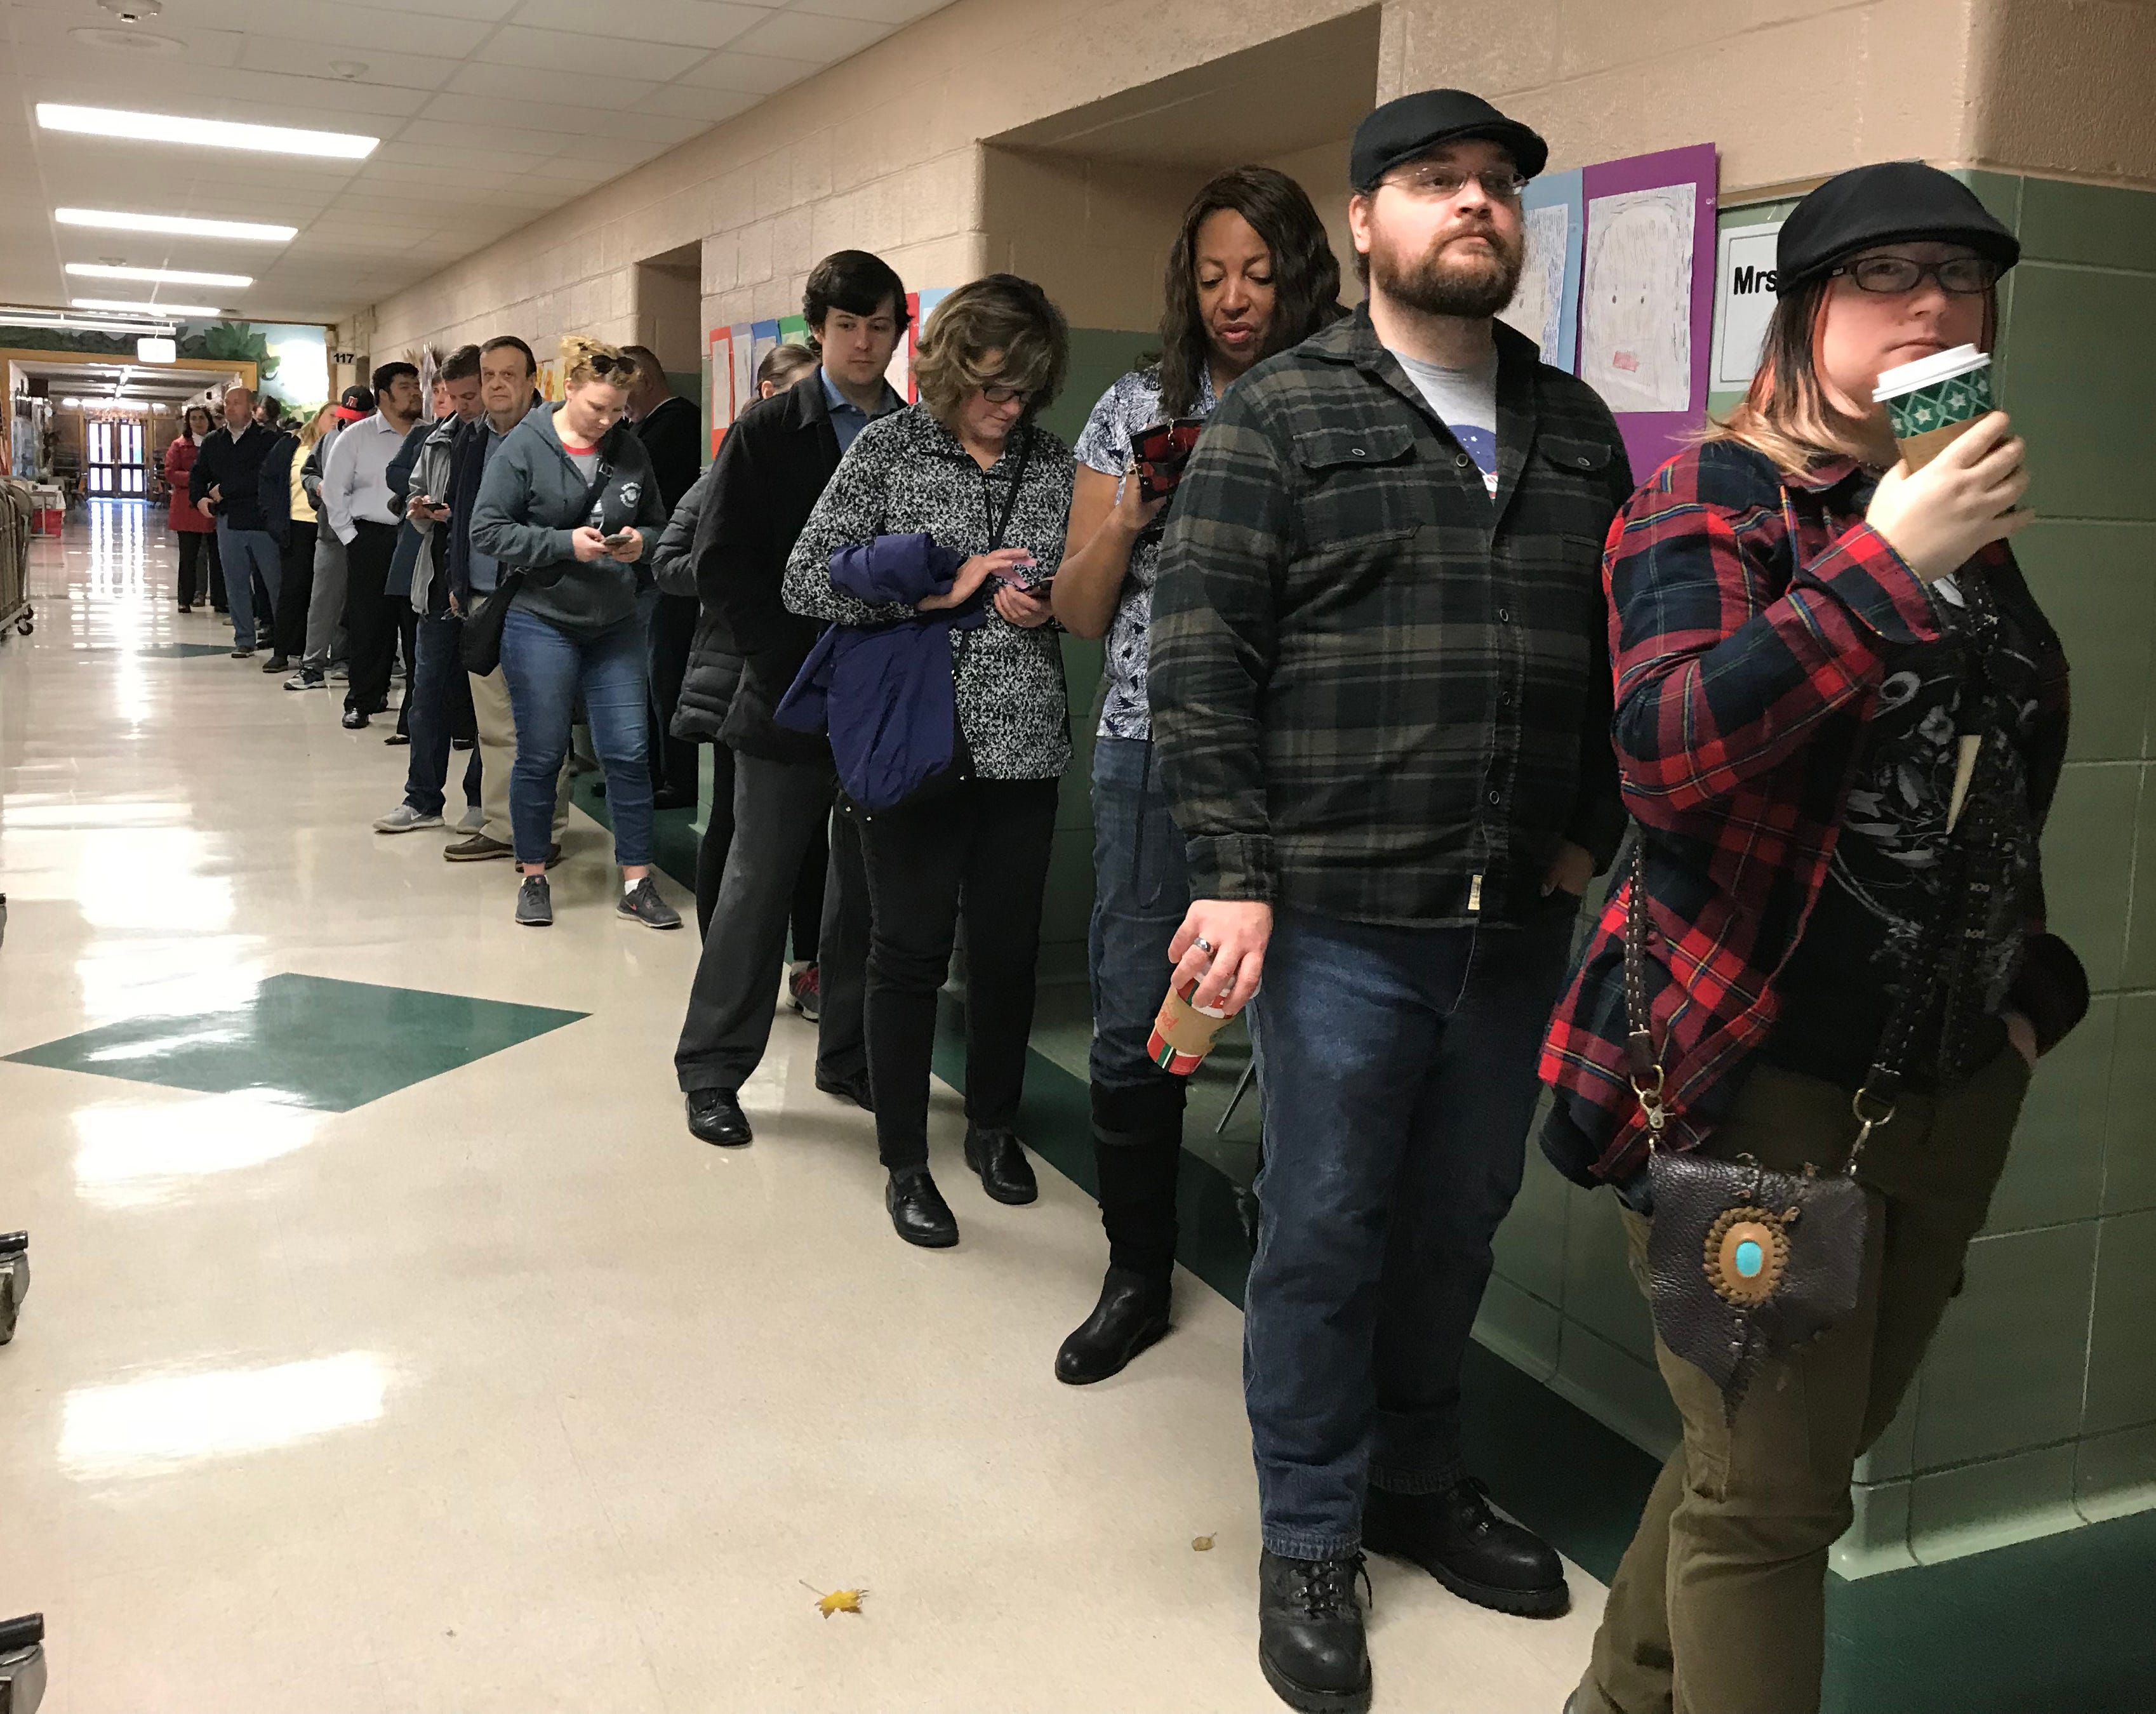 A long line of voters wait in the hallway outside the gymnasium at Monteith Elementary School to cast their ballots in the midterm election Tuesday morning in Grosse Pointe Woods, Michigan.